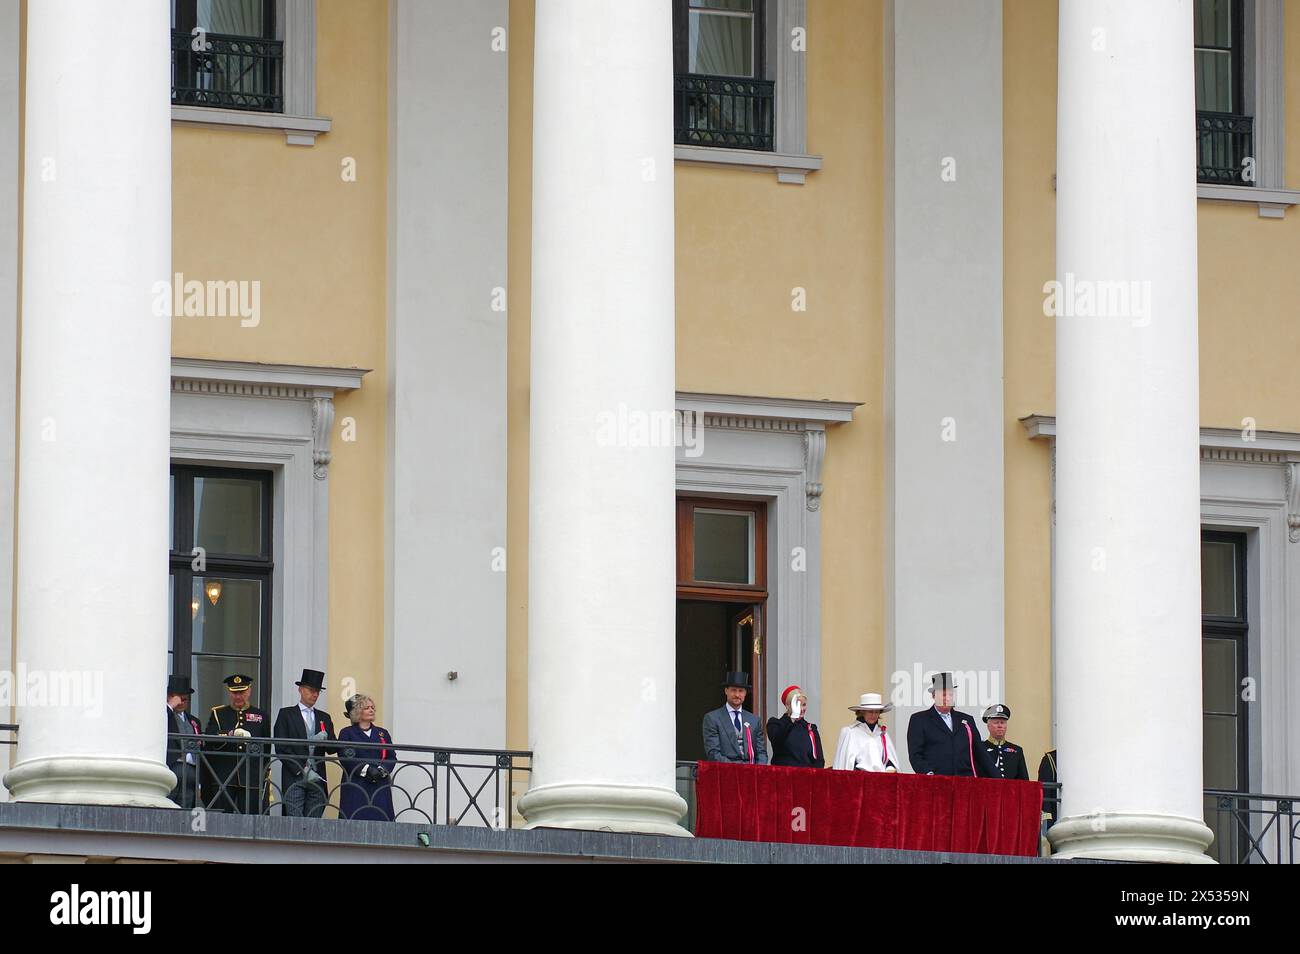 The royal family on the balcony of the castle, bank holidays 17 May, Norwegian flag, Oslo, Norway Stock Photo